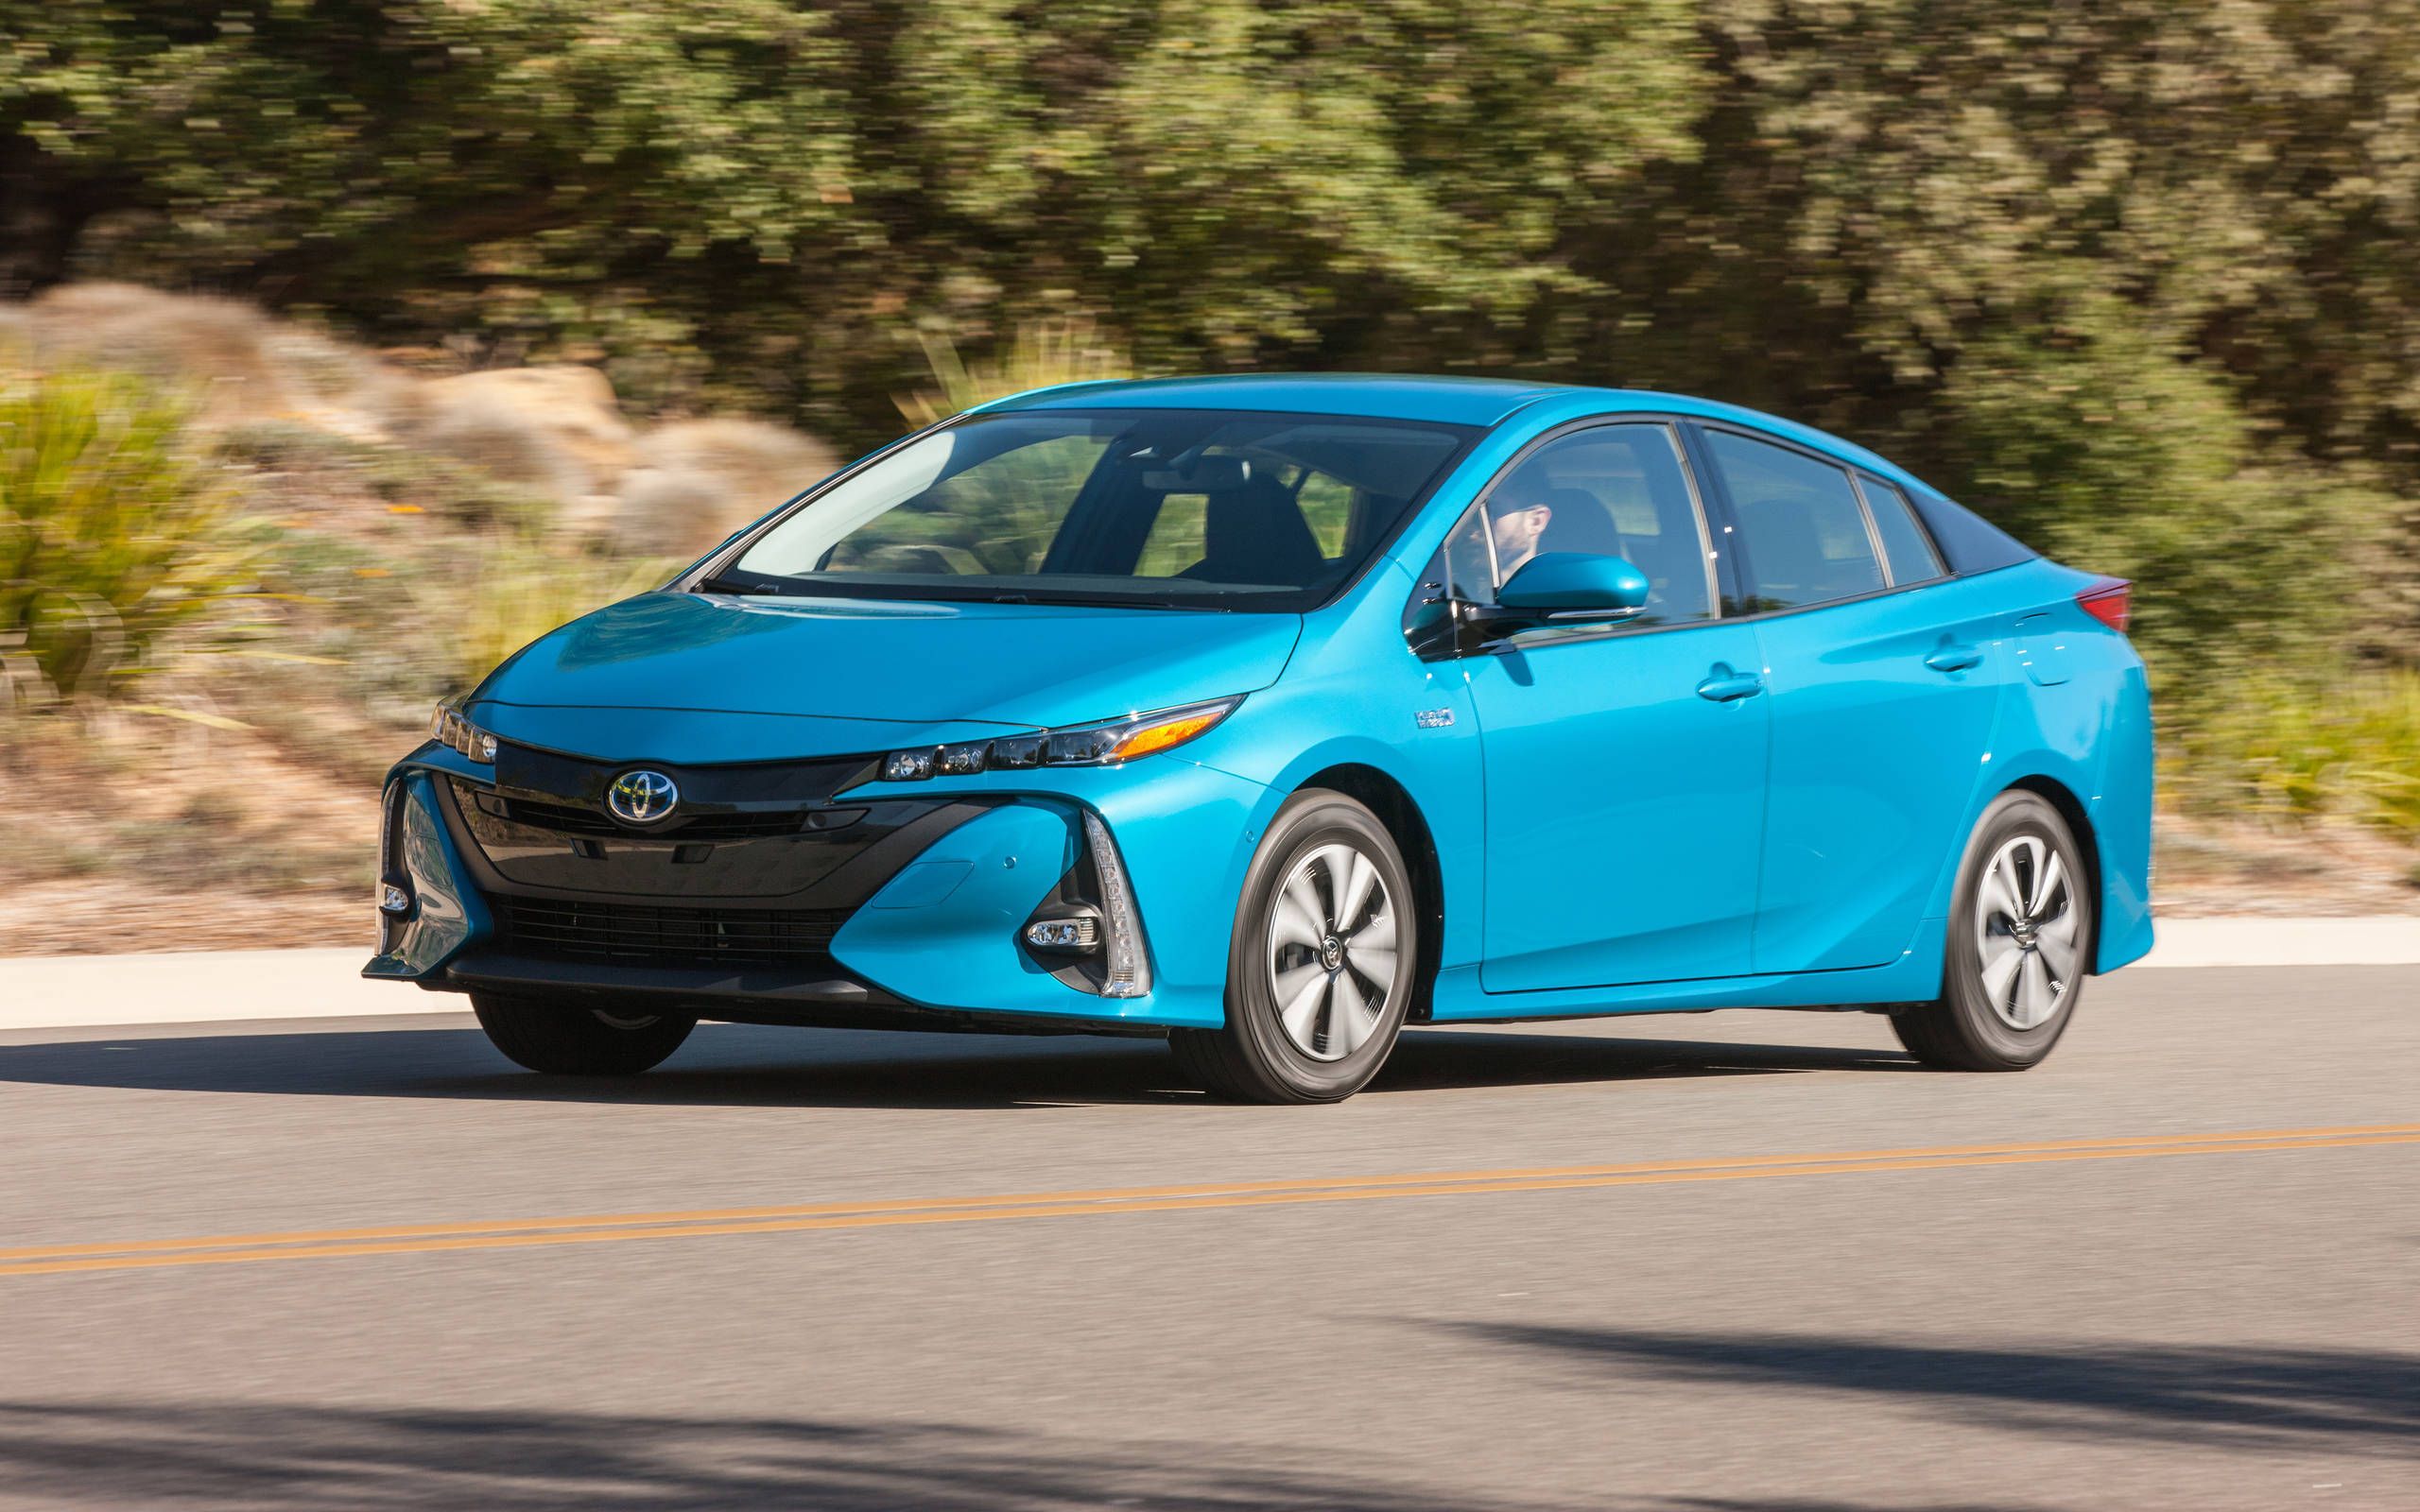 Toyota is pointing Prius Prime TV ads at exactly the customers it wants